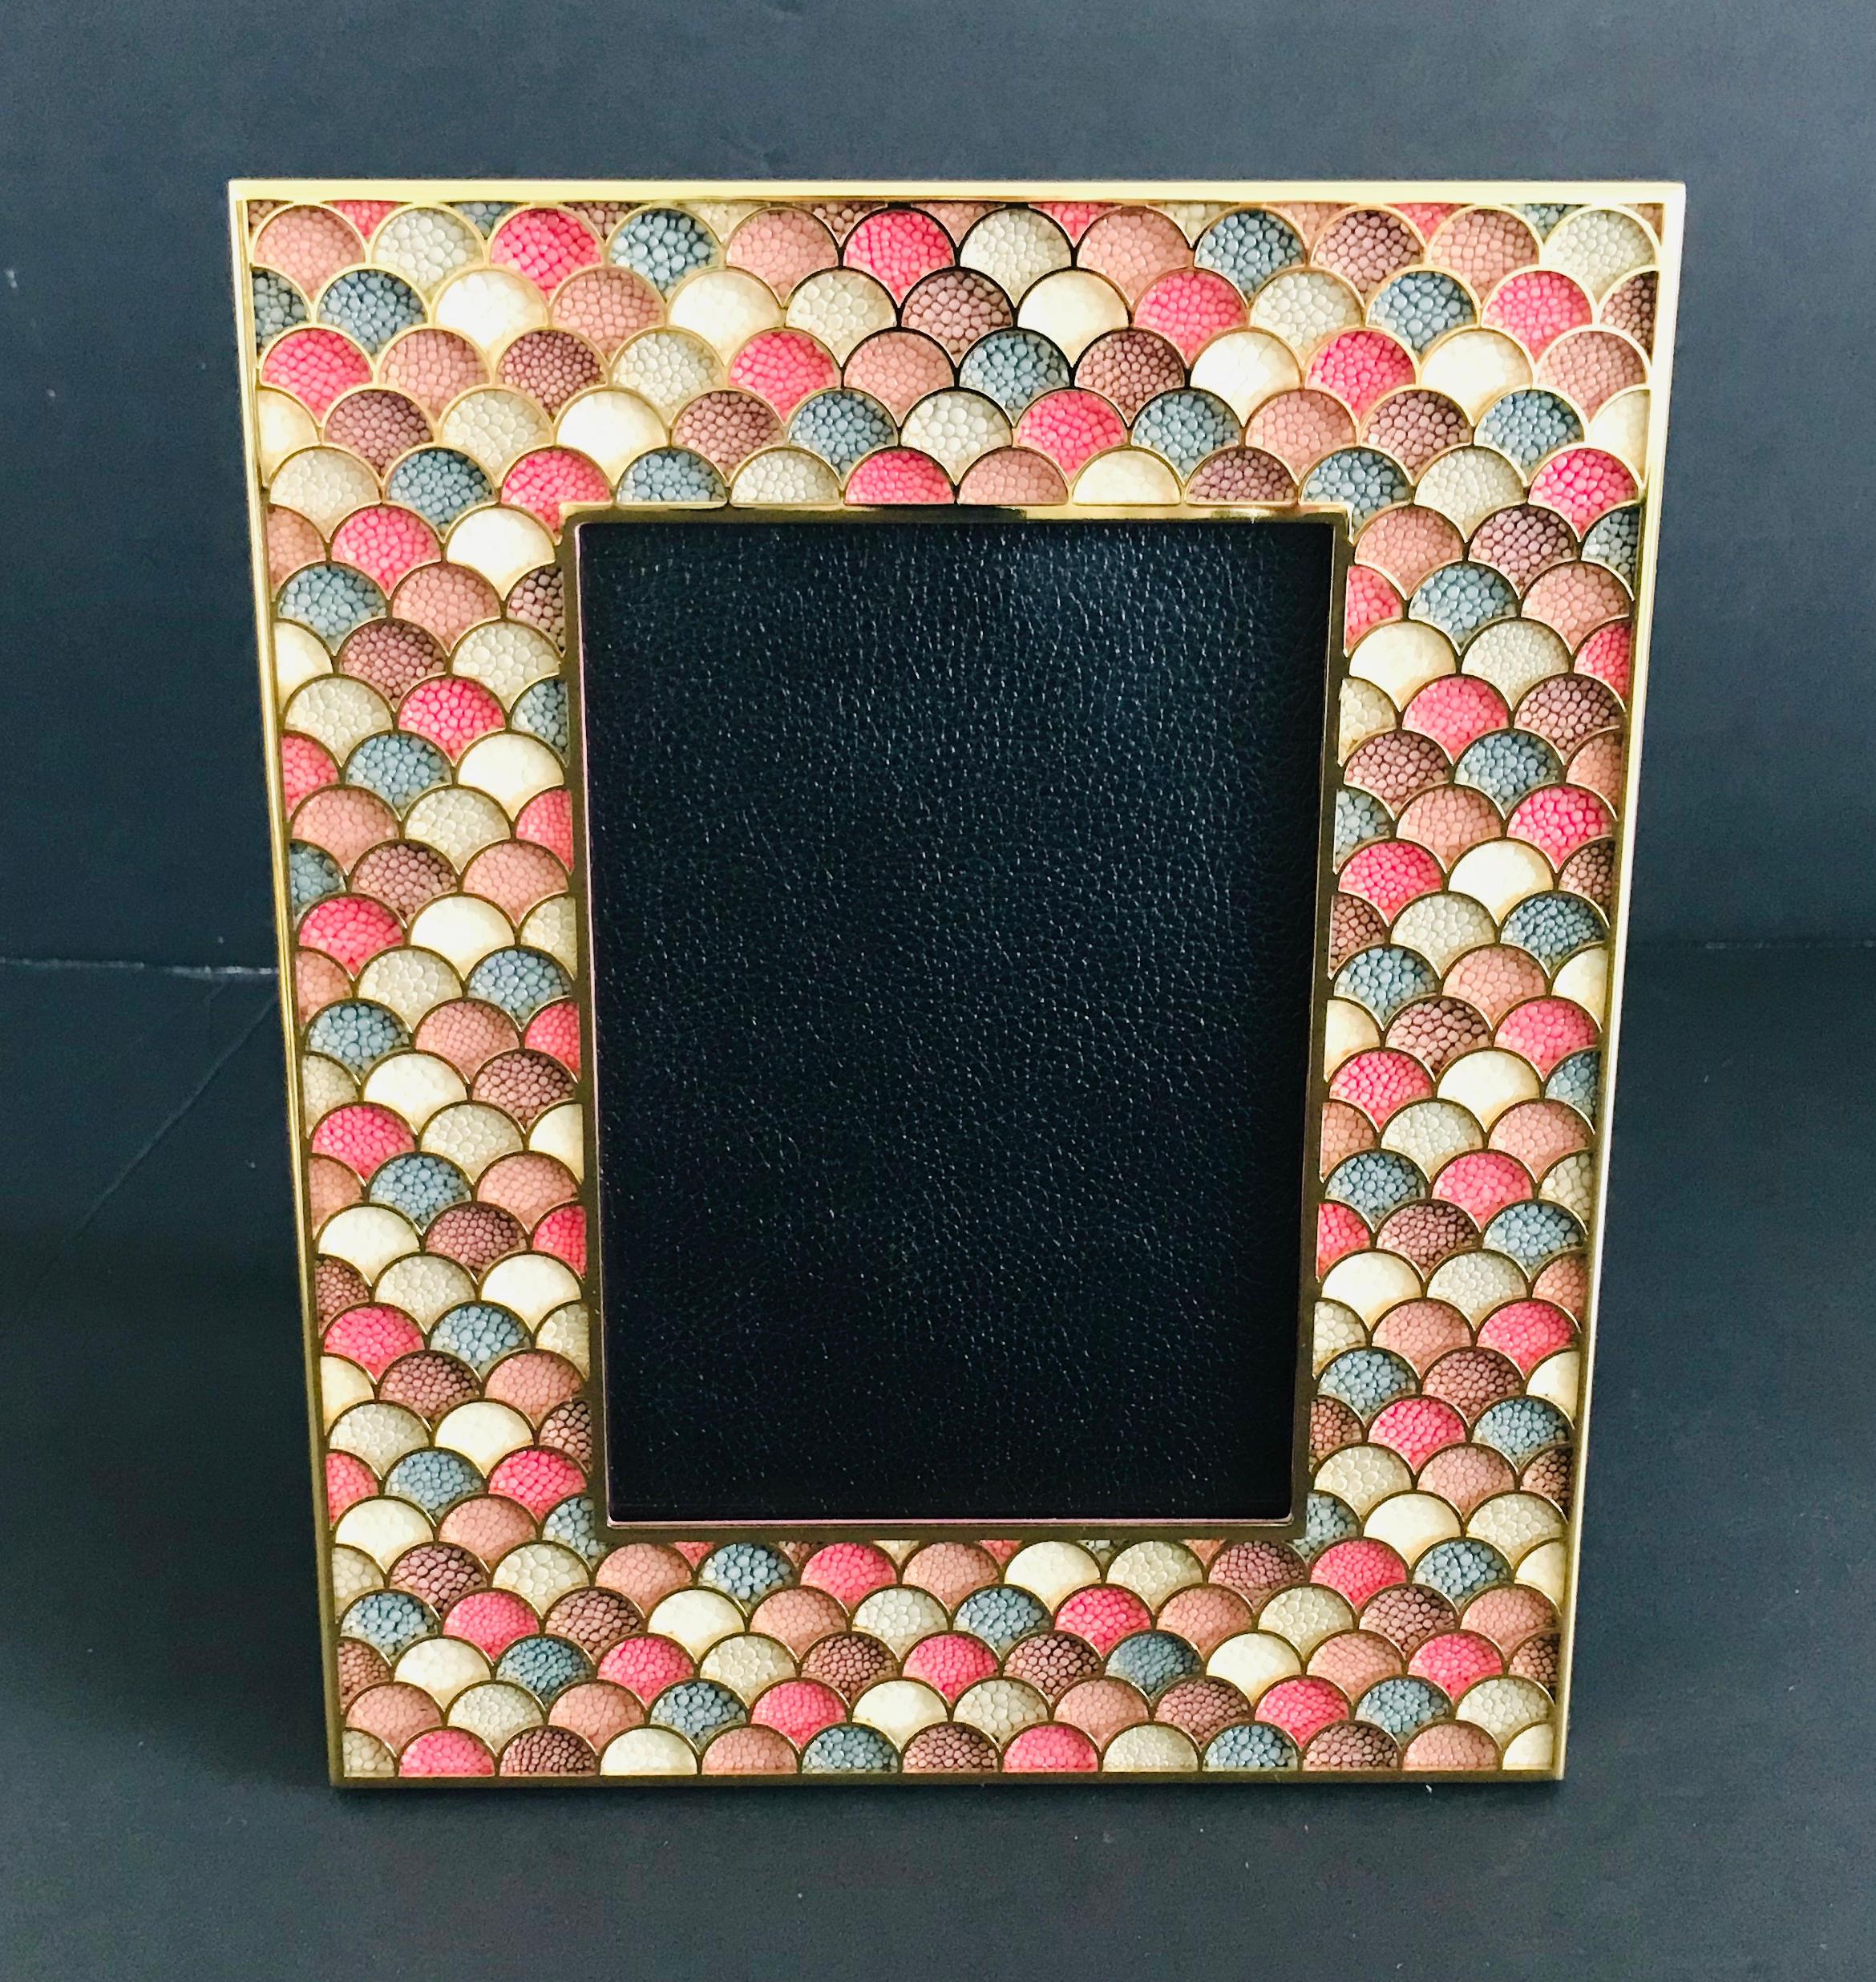 Multi-color shagreen leather and 24 karat gold-plated photo frame by Fabio Ltd
Height: 10.5 inches / Width: 8.5 inches / Depth: 1 inch
Photo size: 5 inches by 7 inches
LAST 1 in stock in Los Angeles
Order Reference #: FABIOLTD PF25
This piece makes